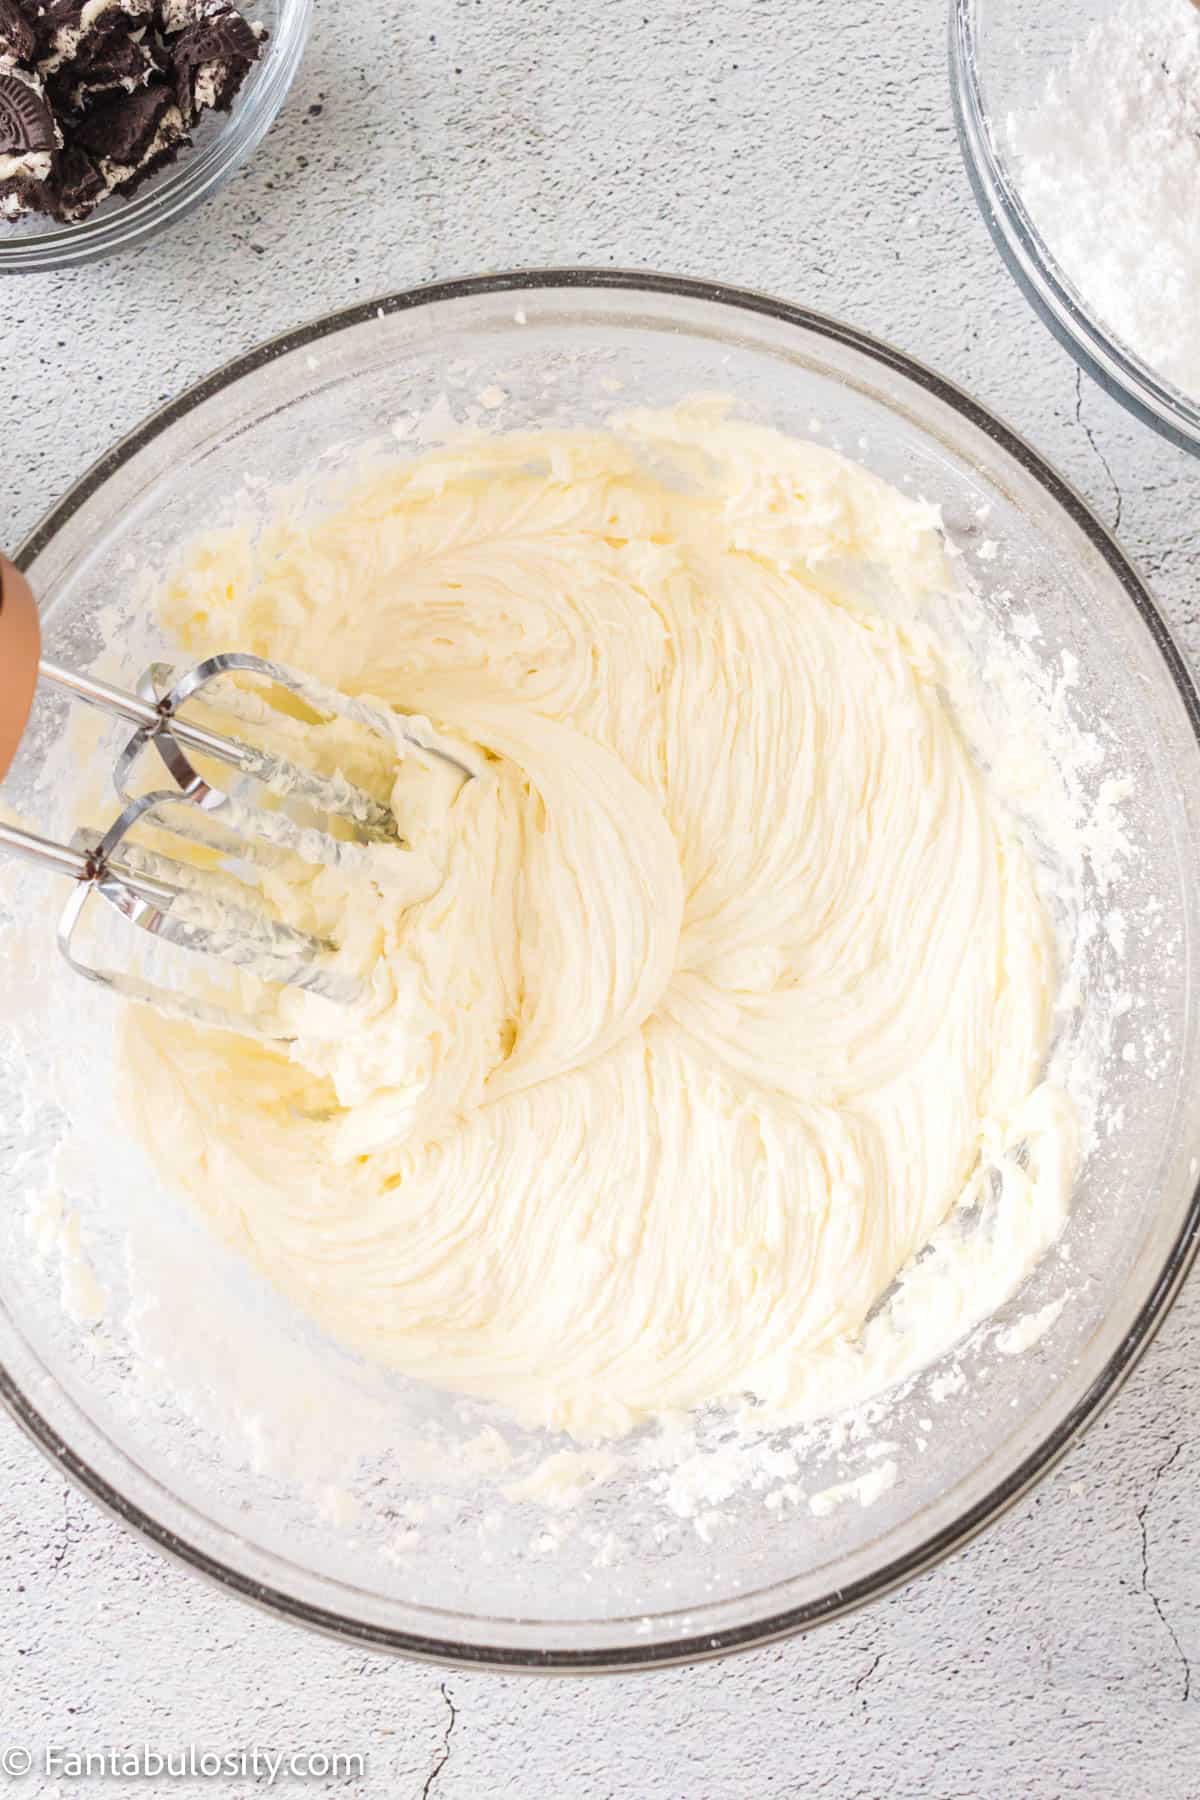 Butter and cream together in mixing bowl.